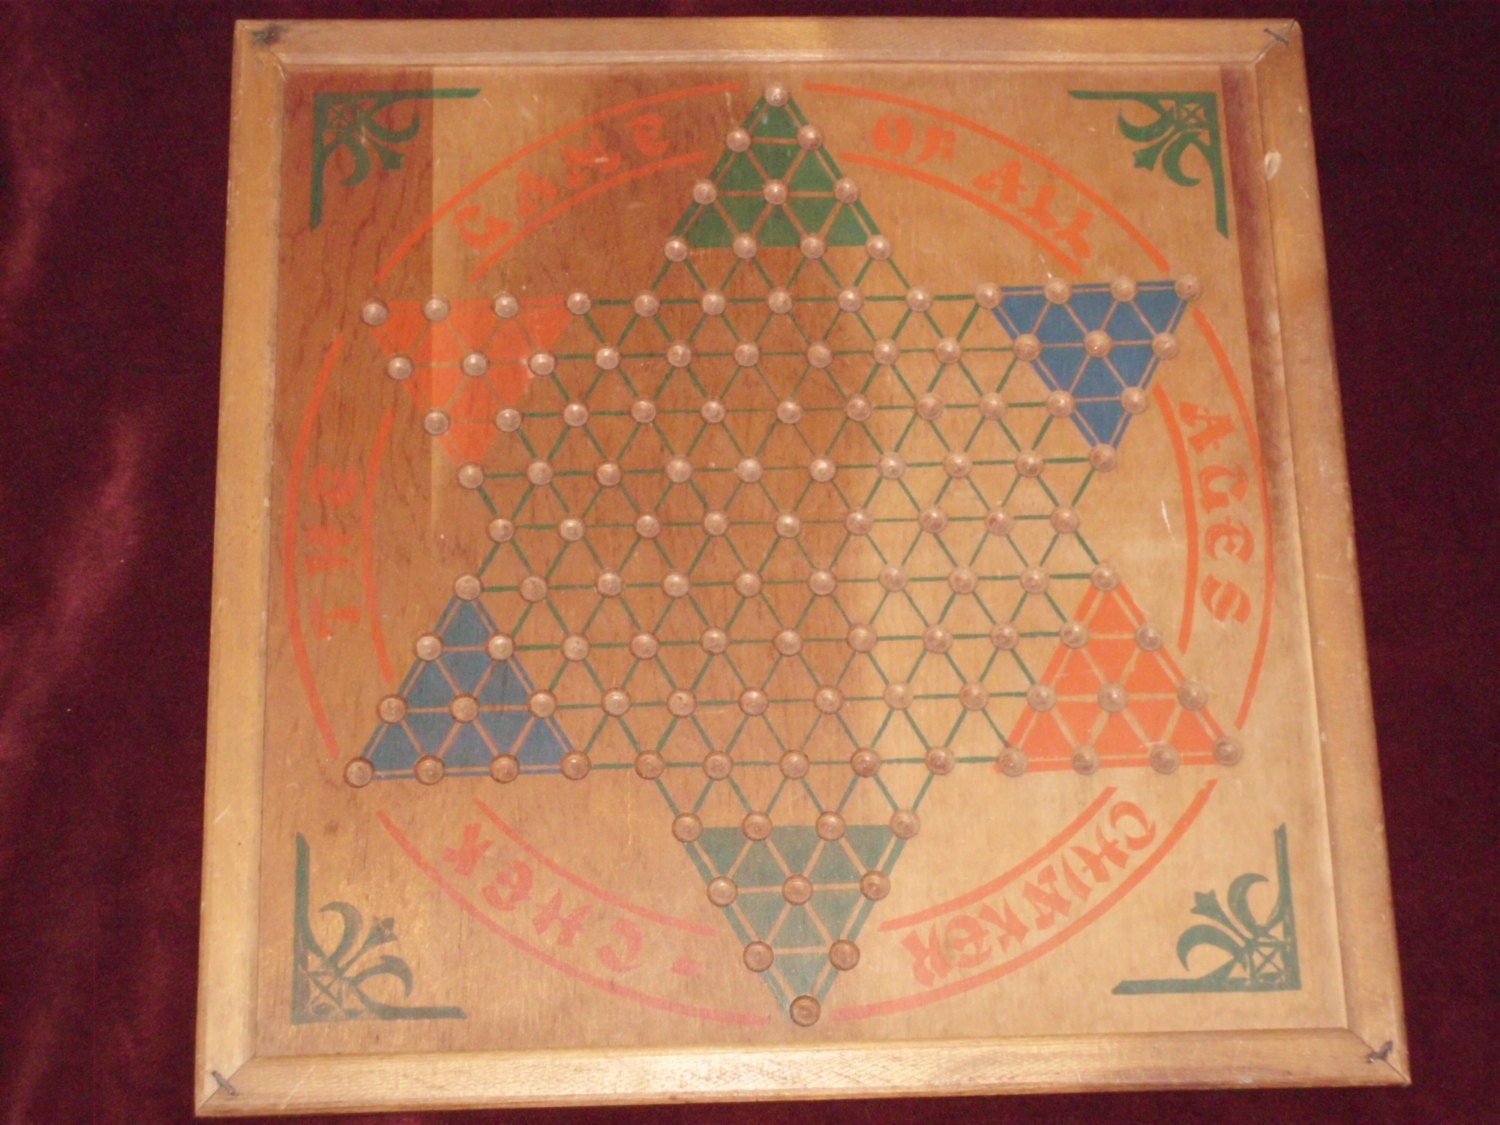 vintage wooden chinese checkers board